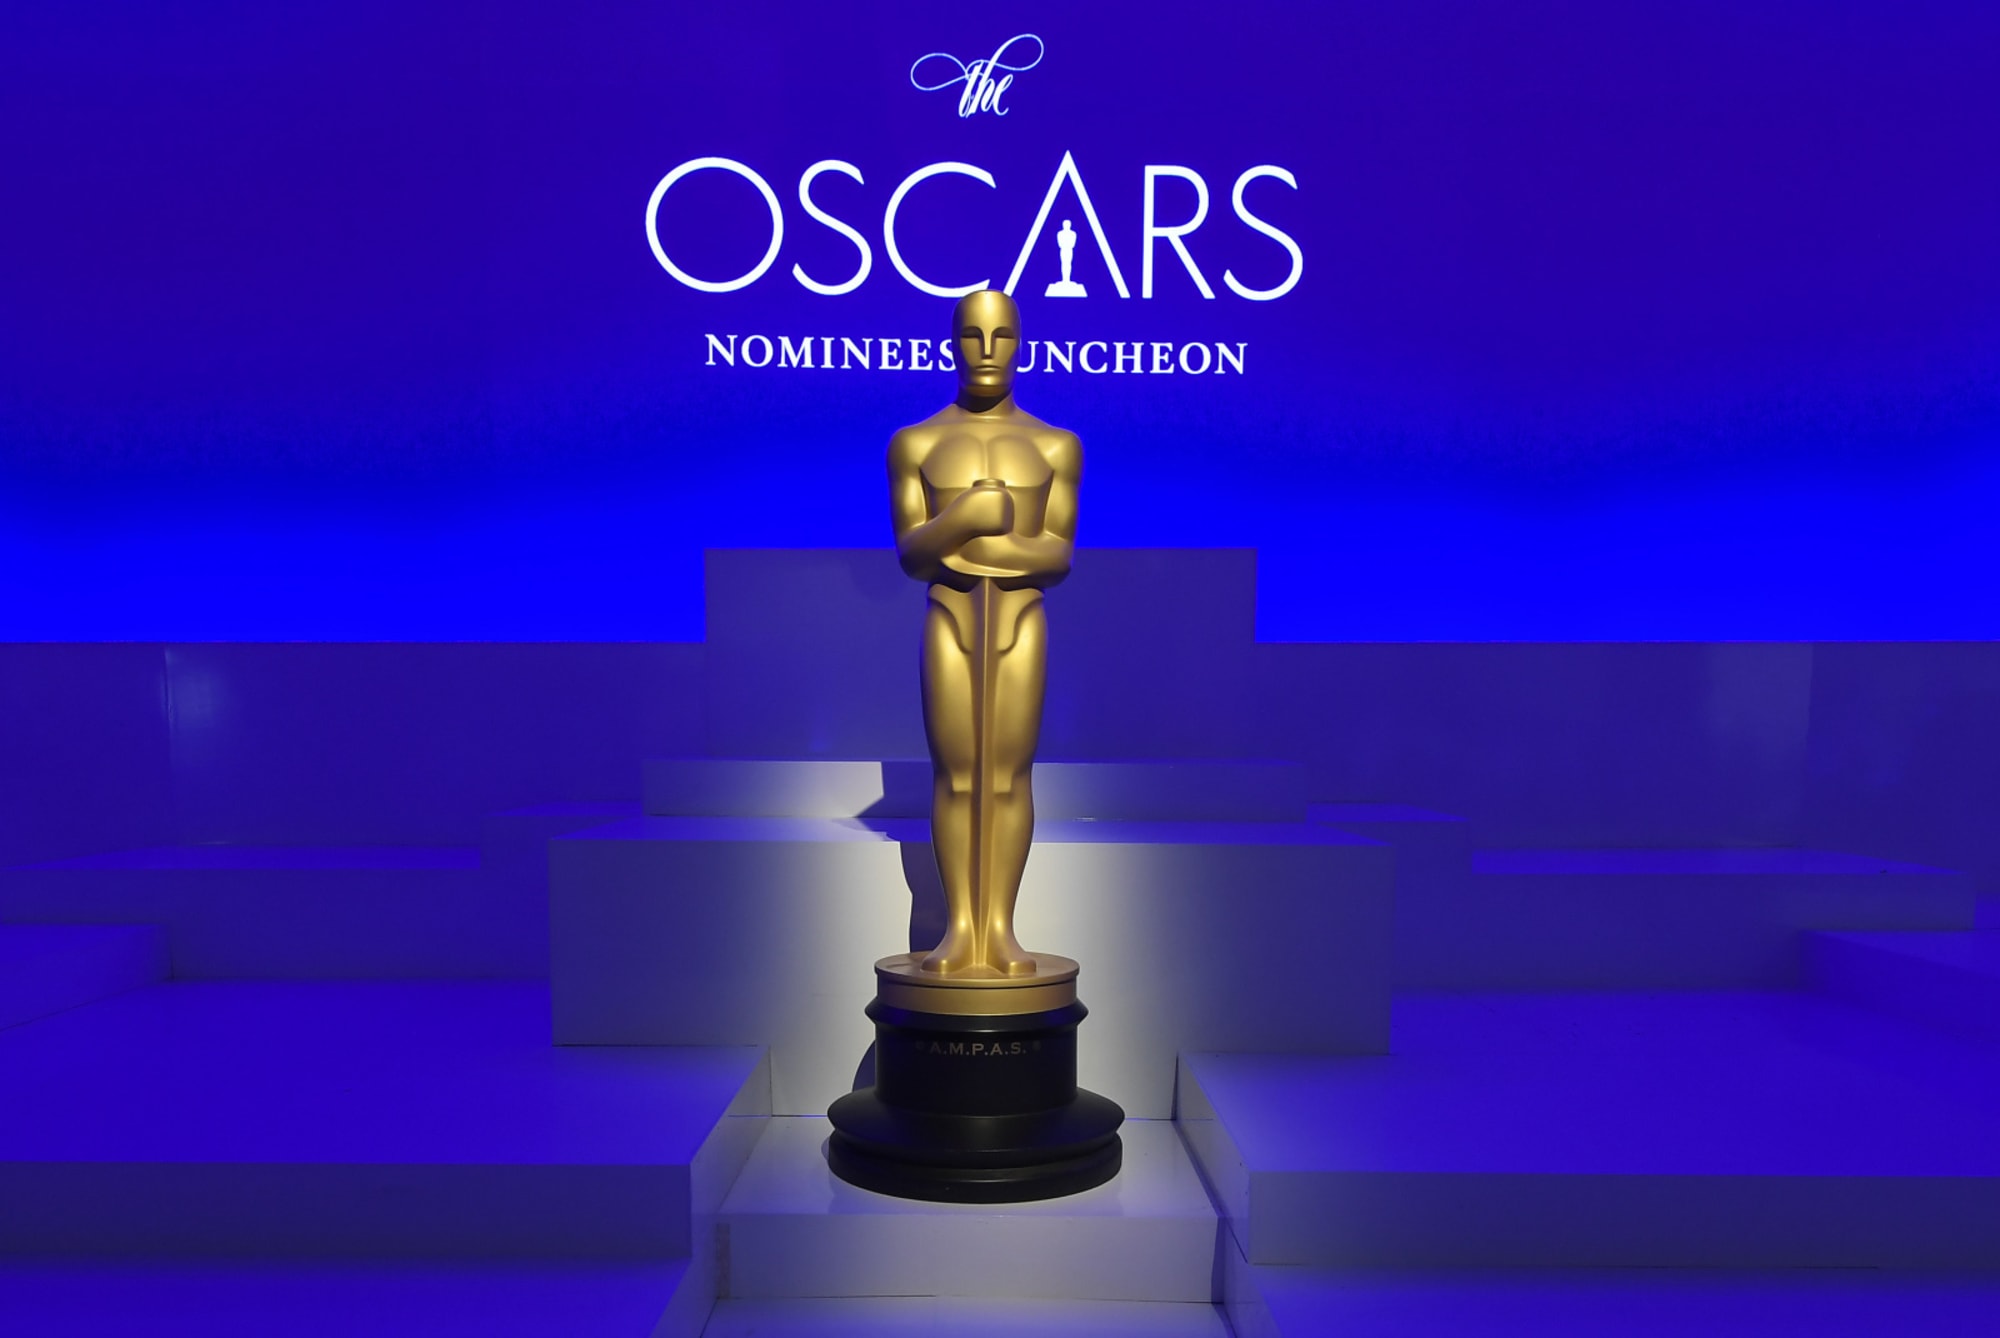 Oscars 2022 Where will the Academy Awards be held this year?